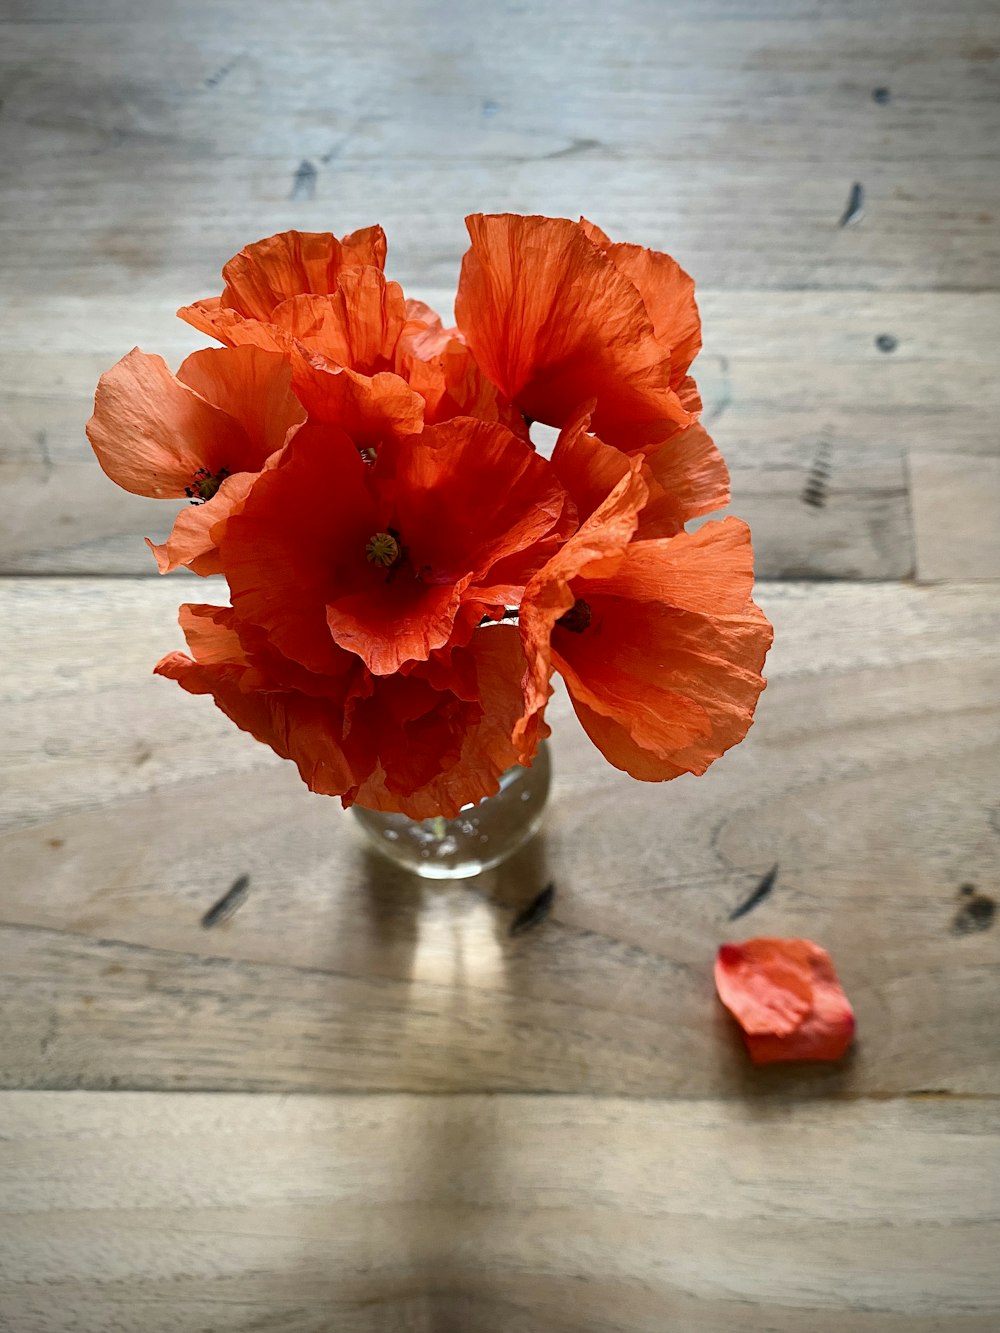 red flower in clear glass vase